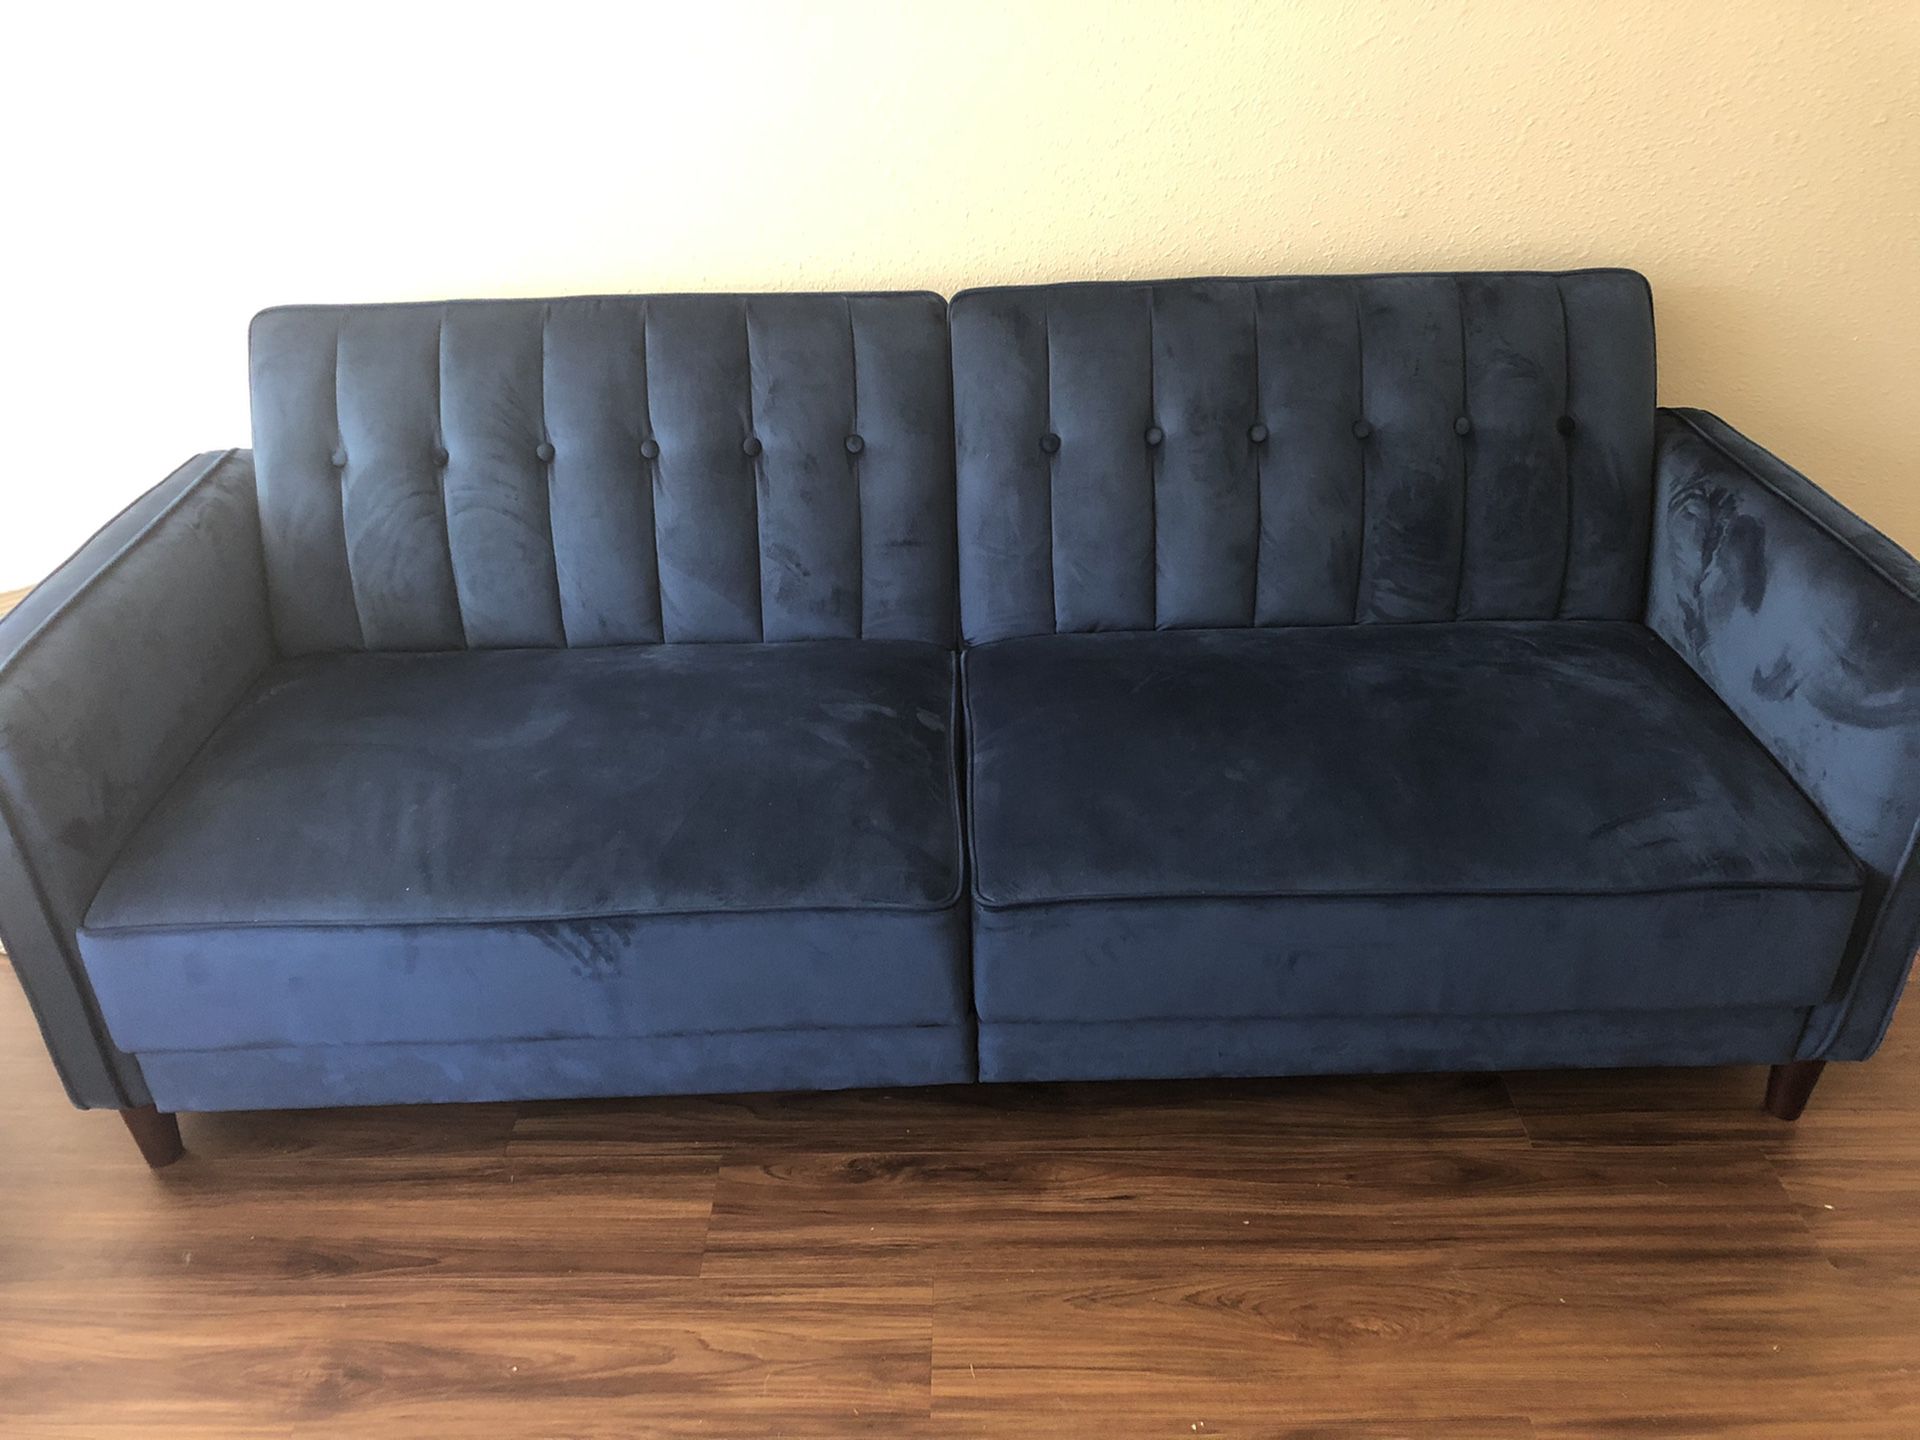 Blue couch and matching chair